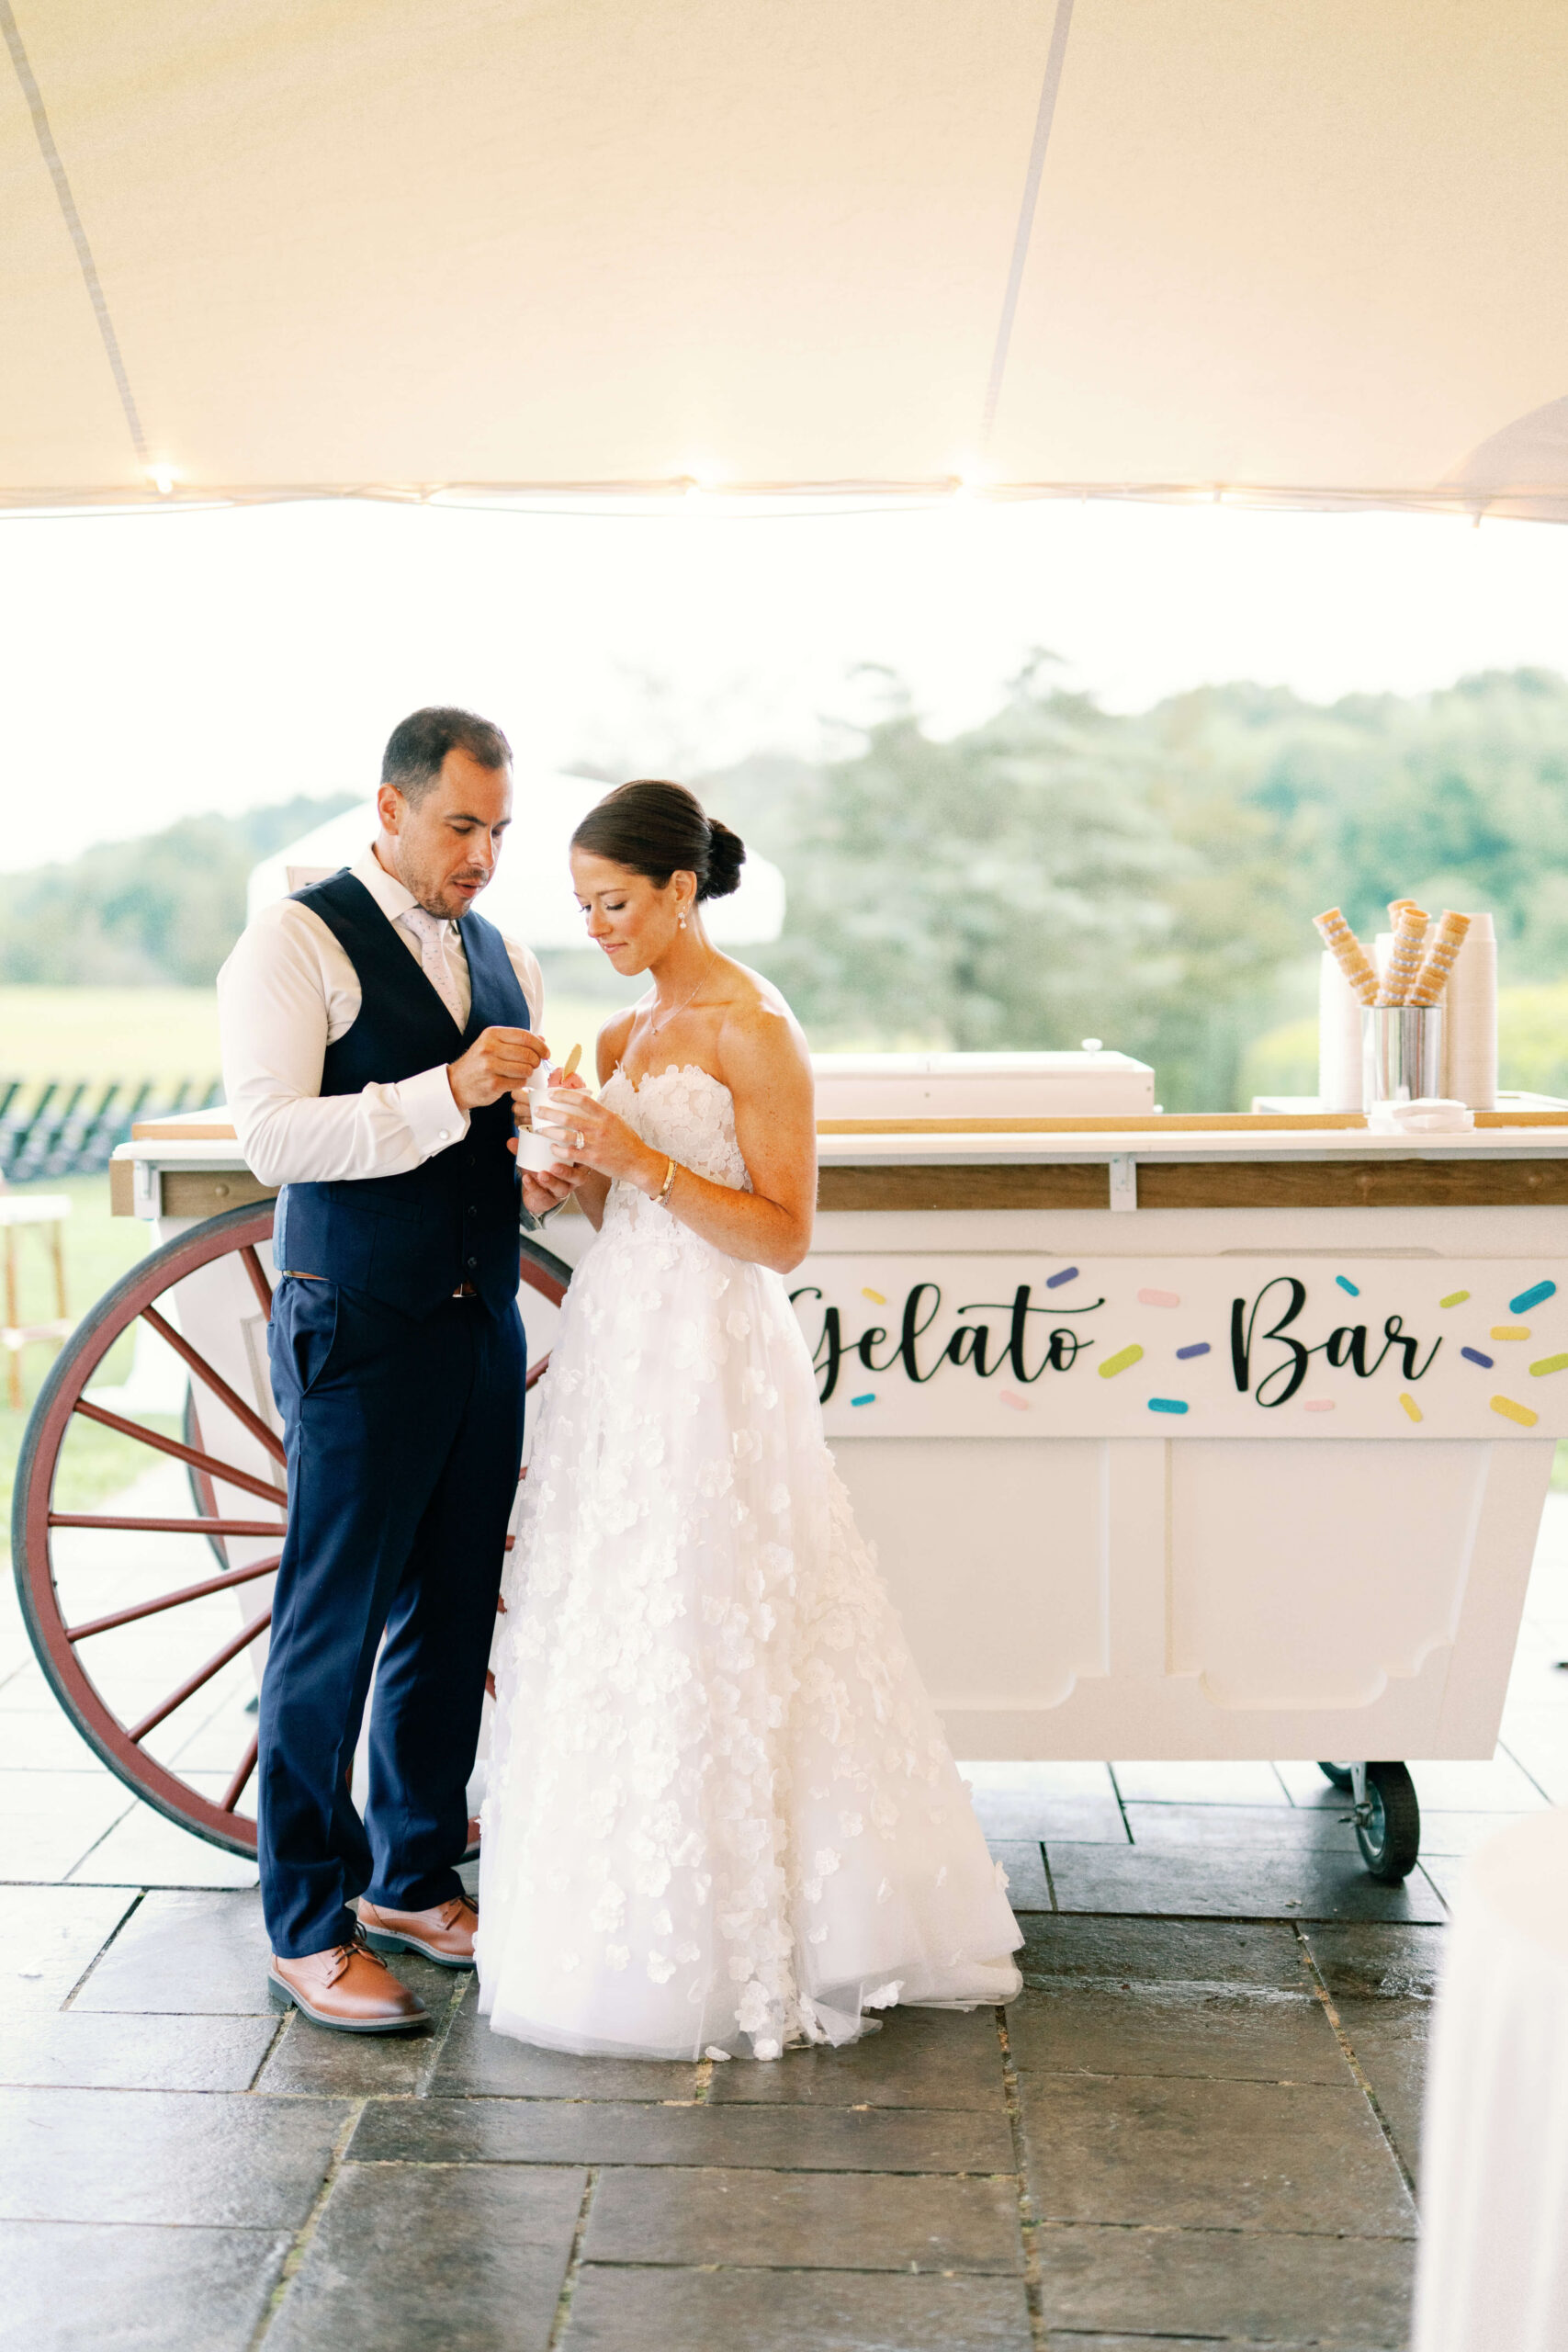 Gelato cart at New England wedding by the shore